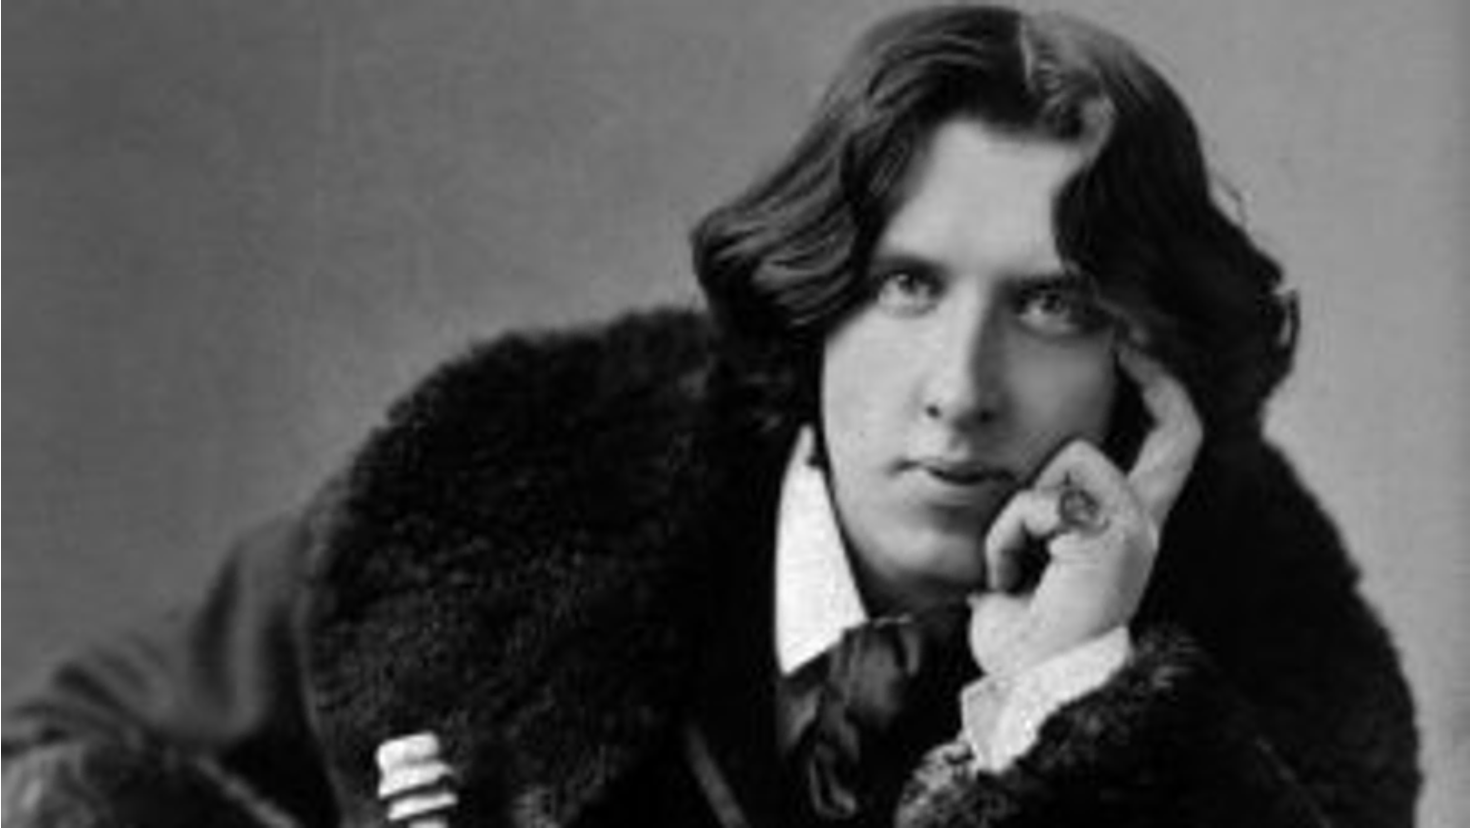 Image of Oscar Wilde in a fur coat with a ring.